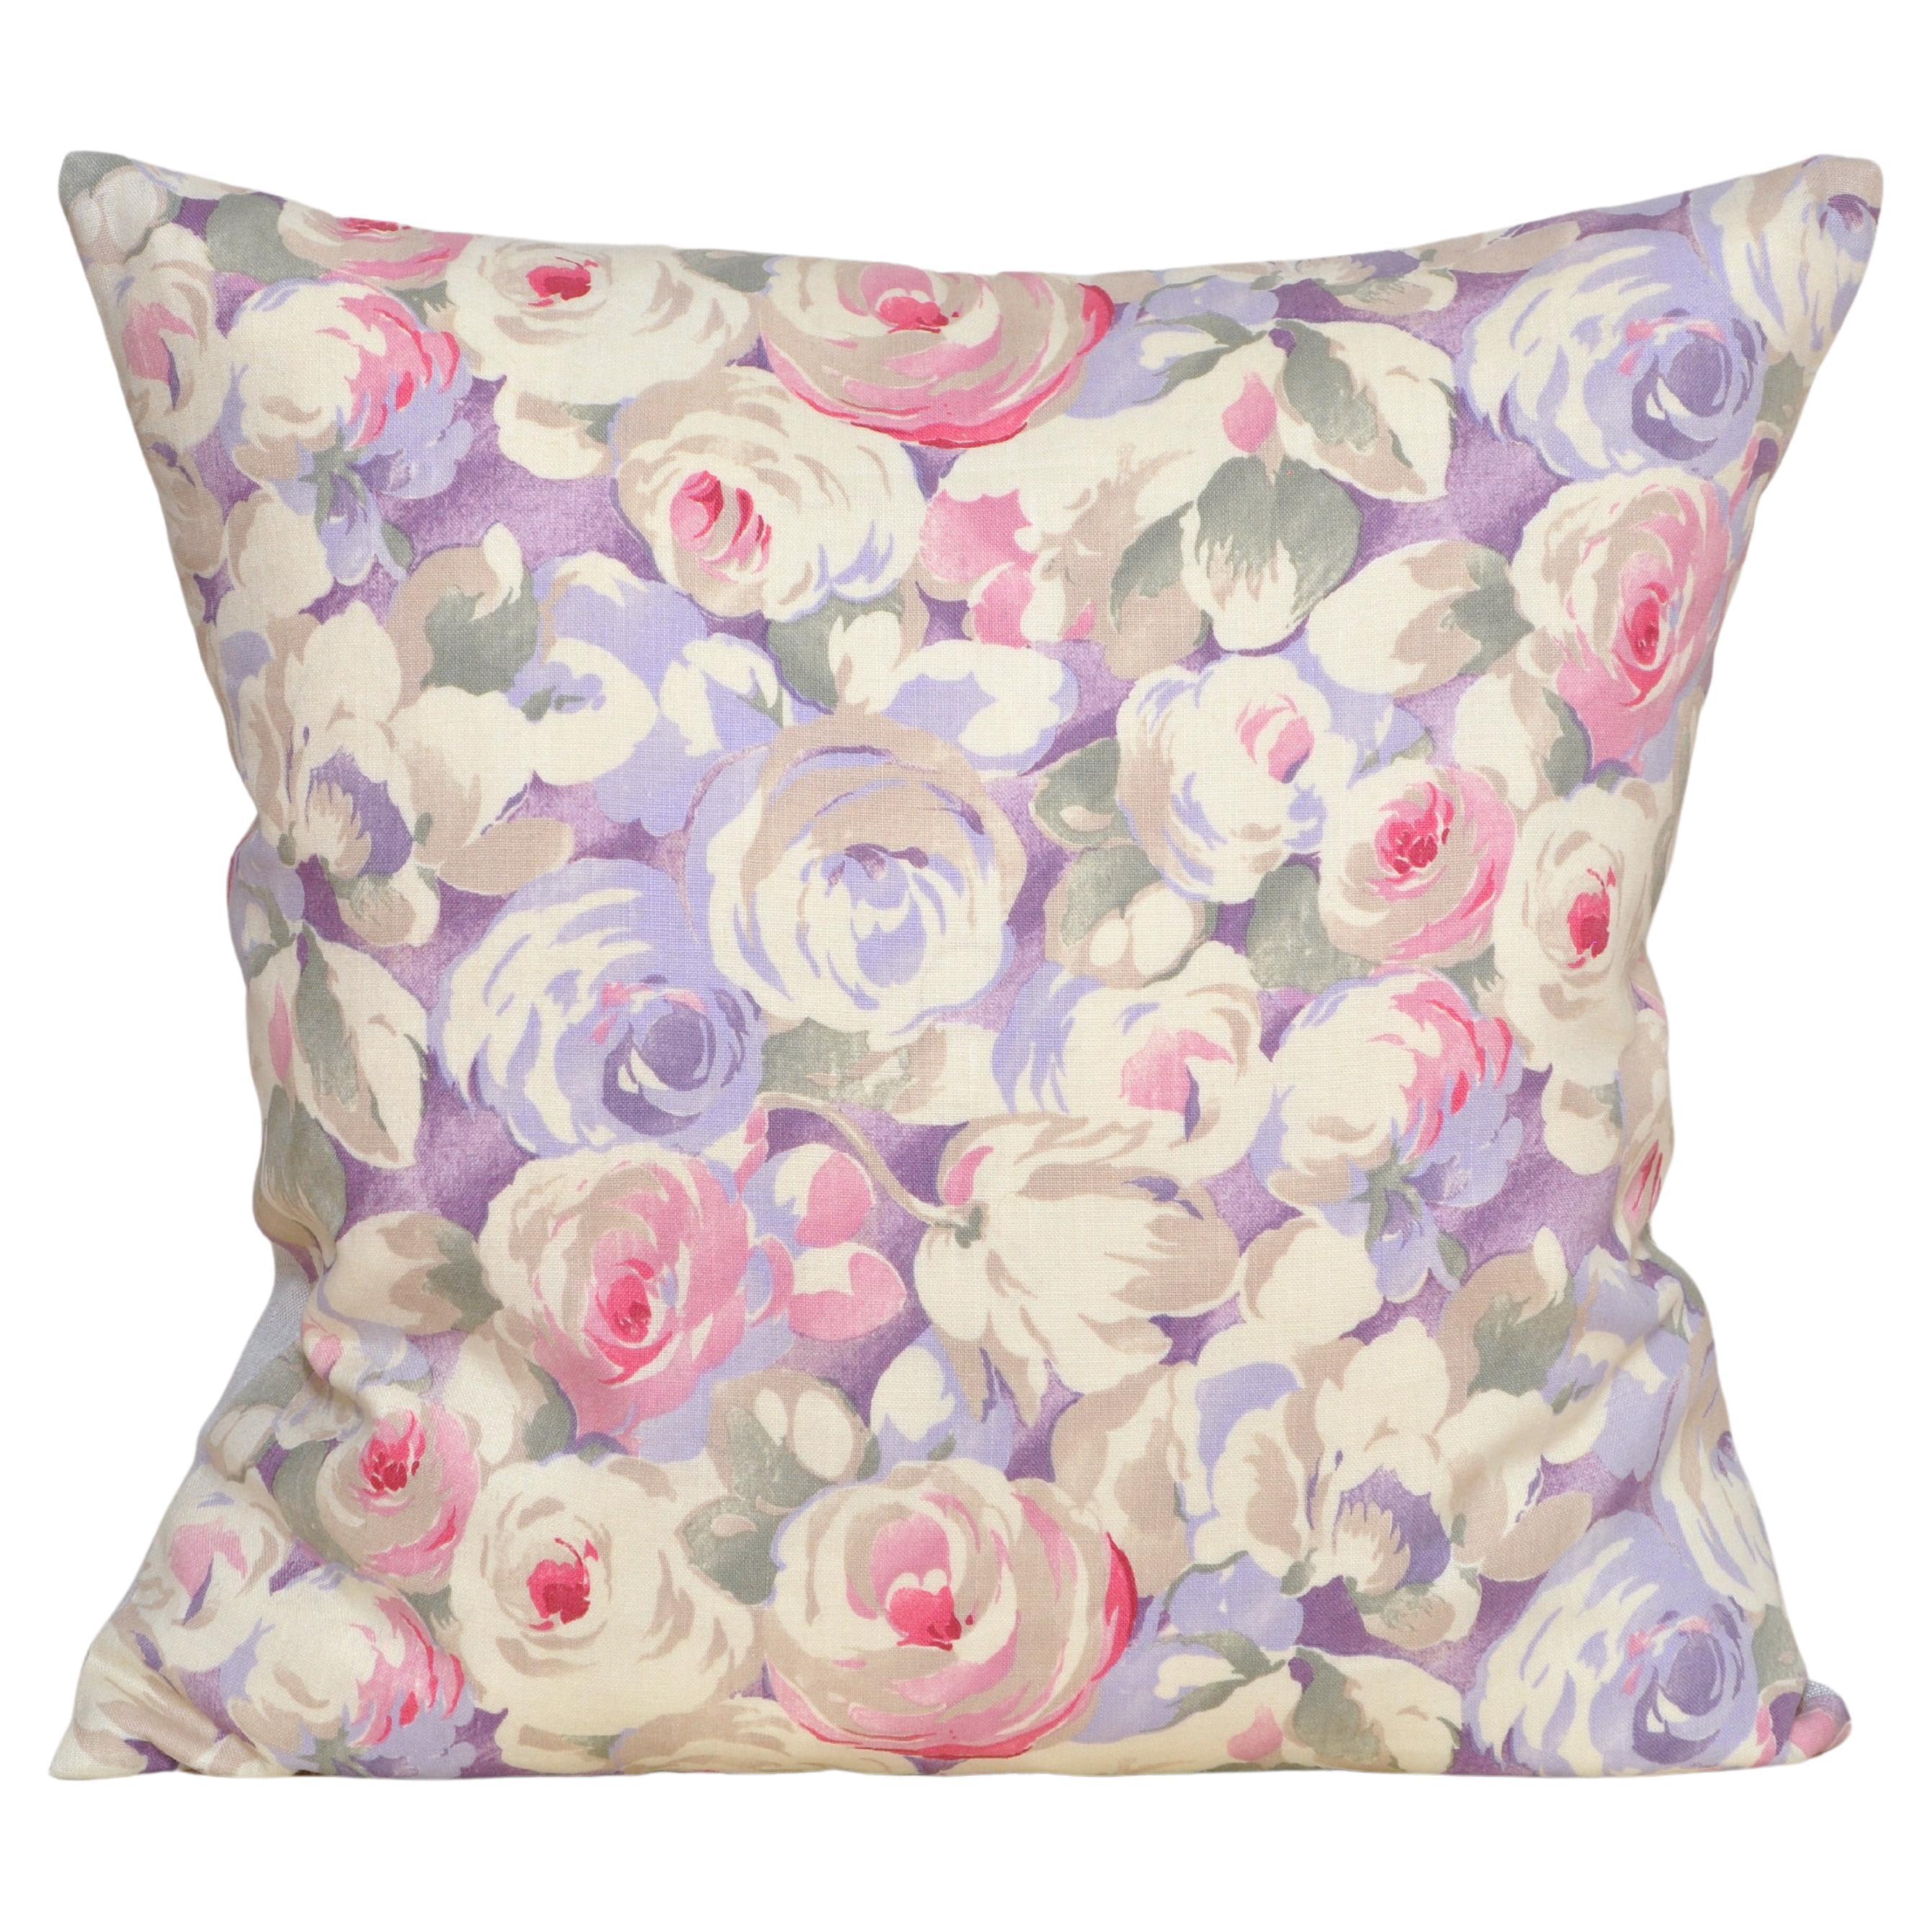 Luxury Vintage Irish Linen Pillow by Katie Larmour Couture Cushions Floral Rose